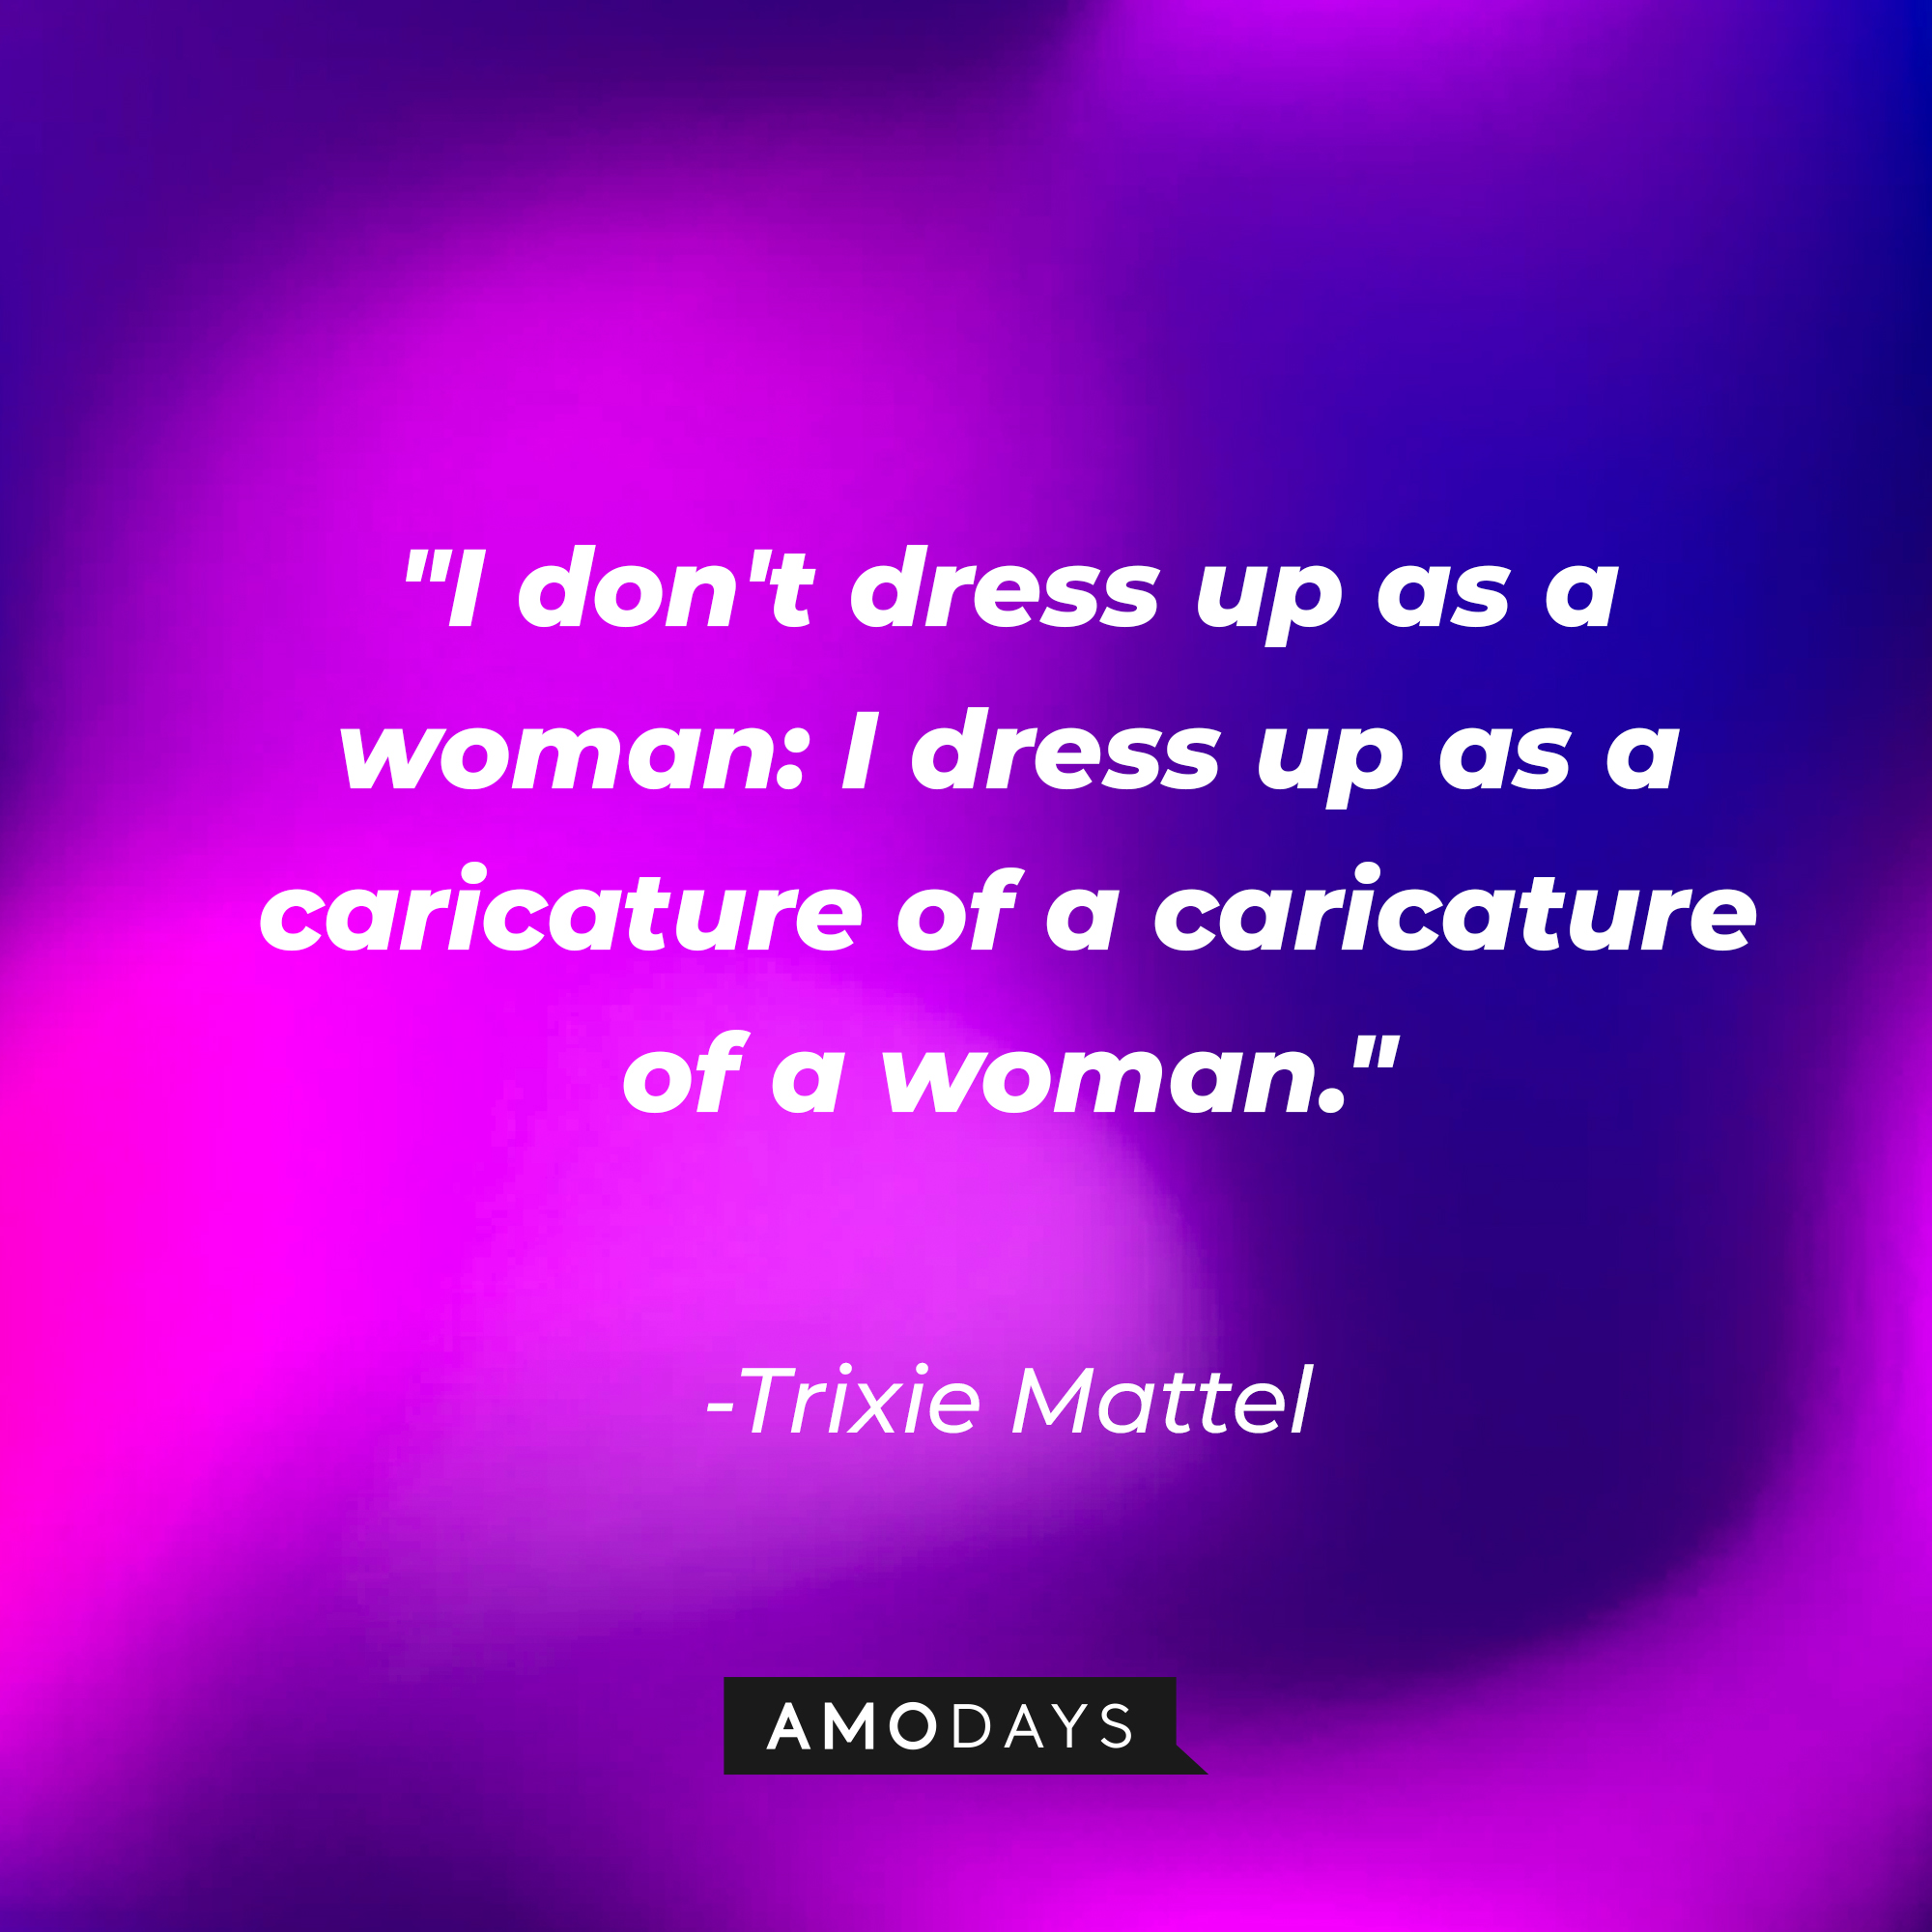 Trixie Mattel's quote: "I don't dress up as a woman: I dress up as a caricature of a caricature of a woman." | Source: AmoDays